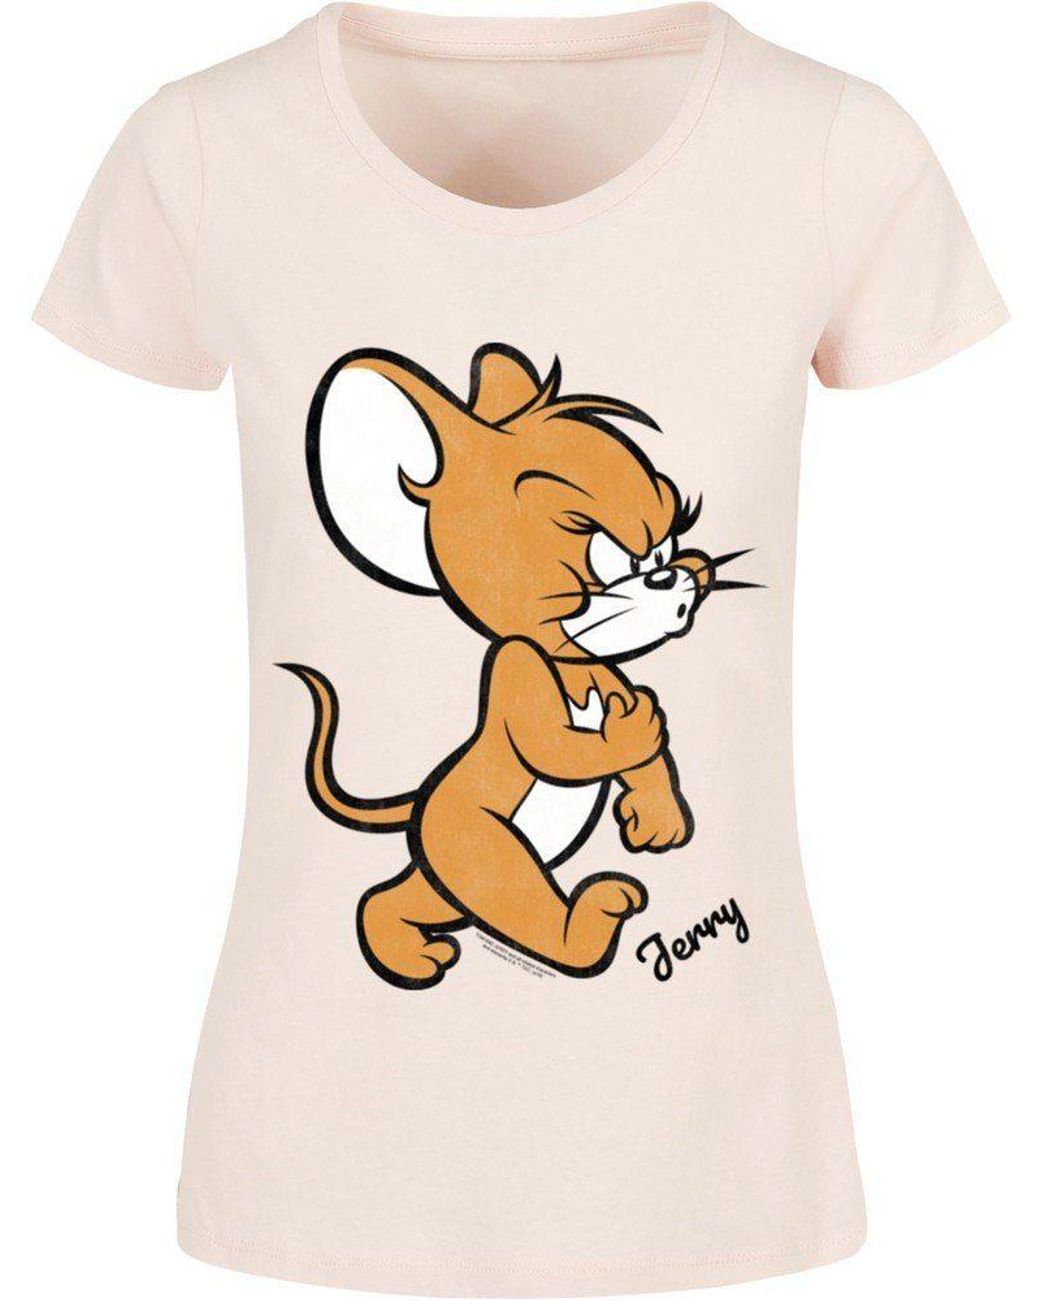 T-Shirt Jerry Mouse DE | Merchcode Angry Lyst Ladies Tom & Natur in